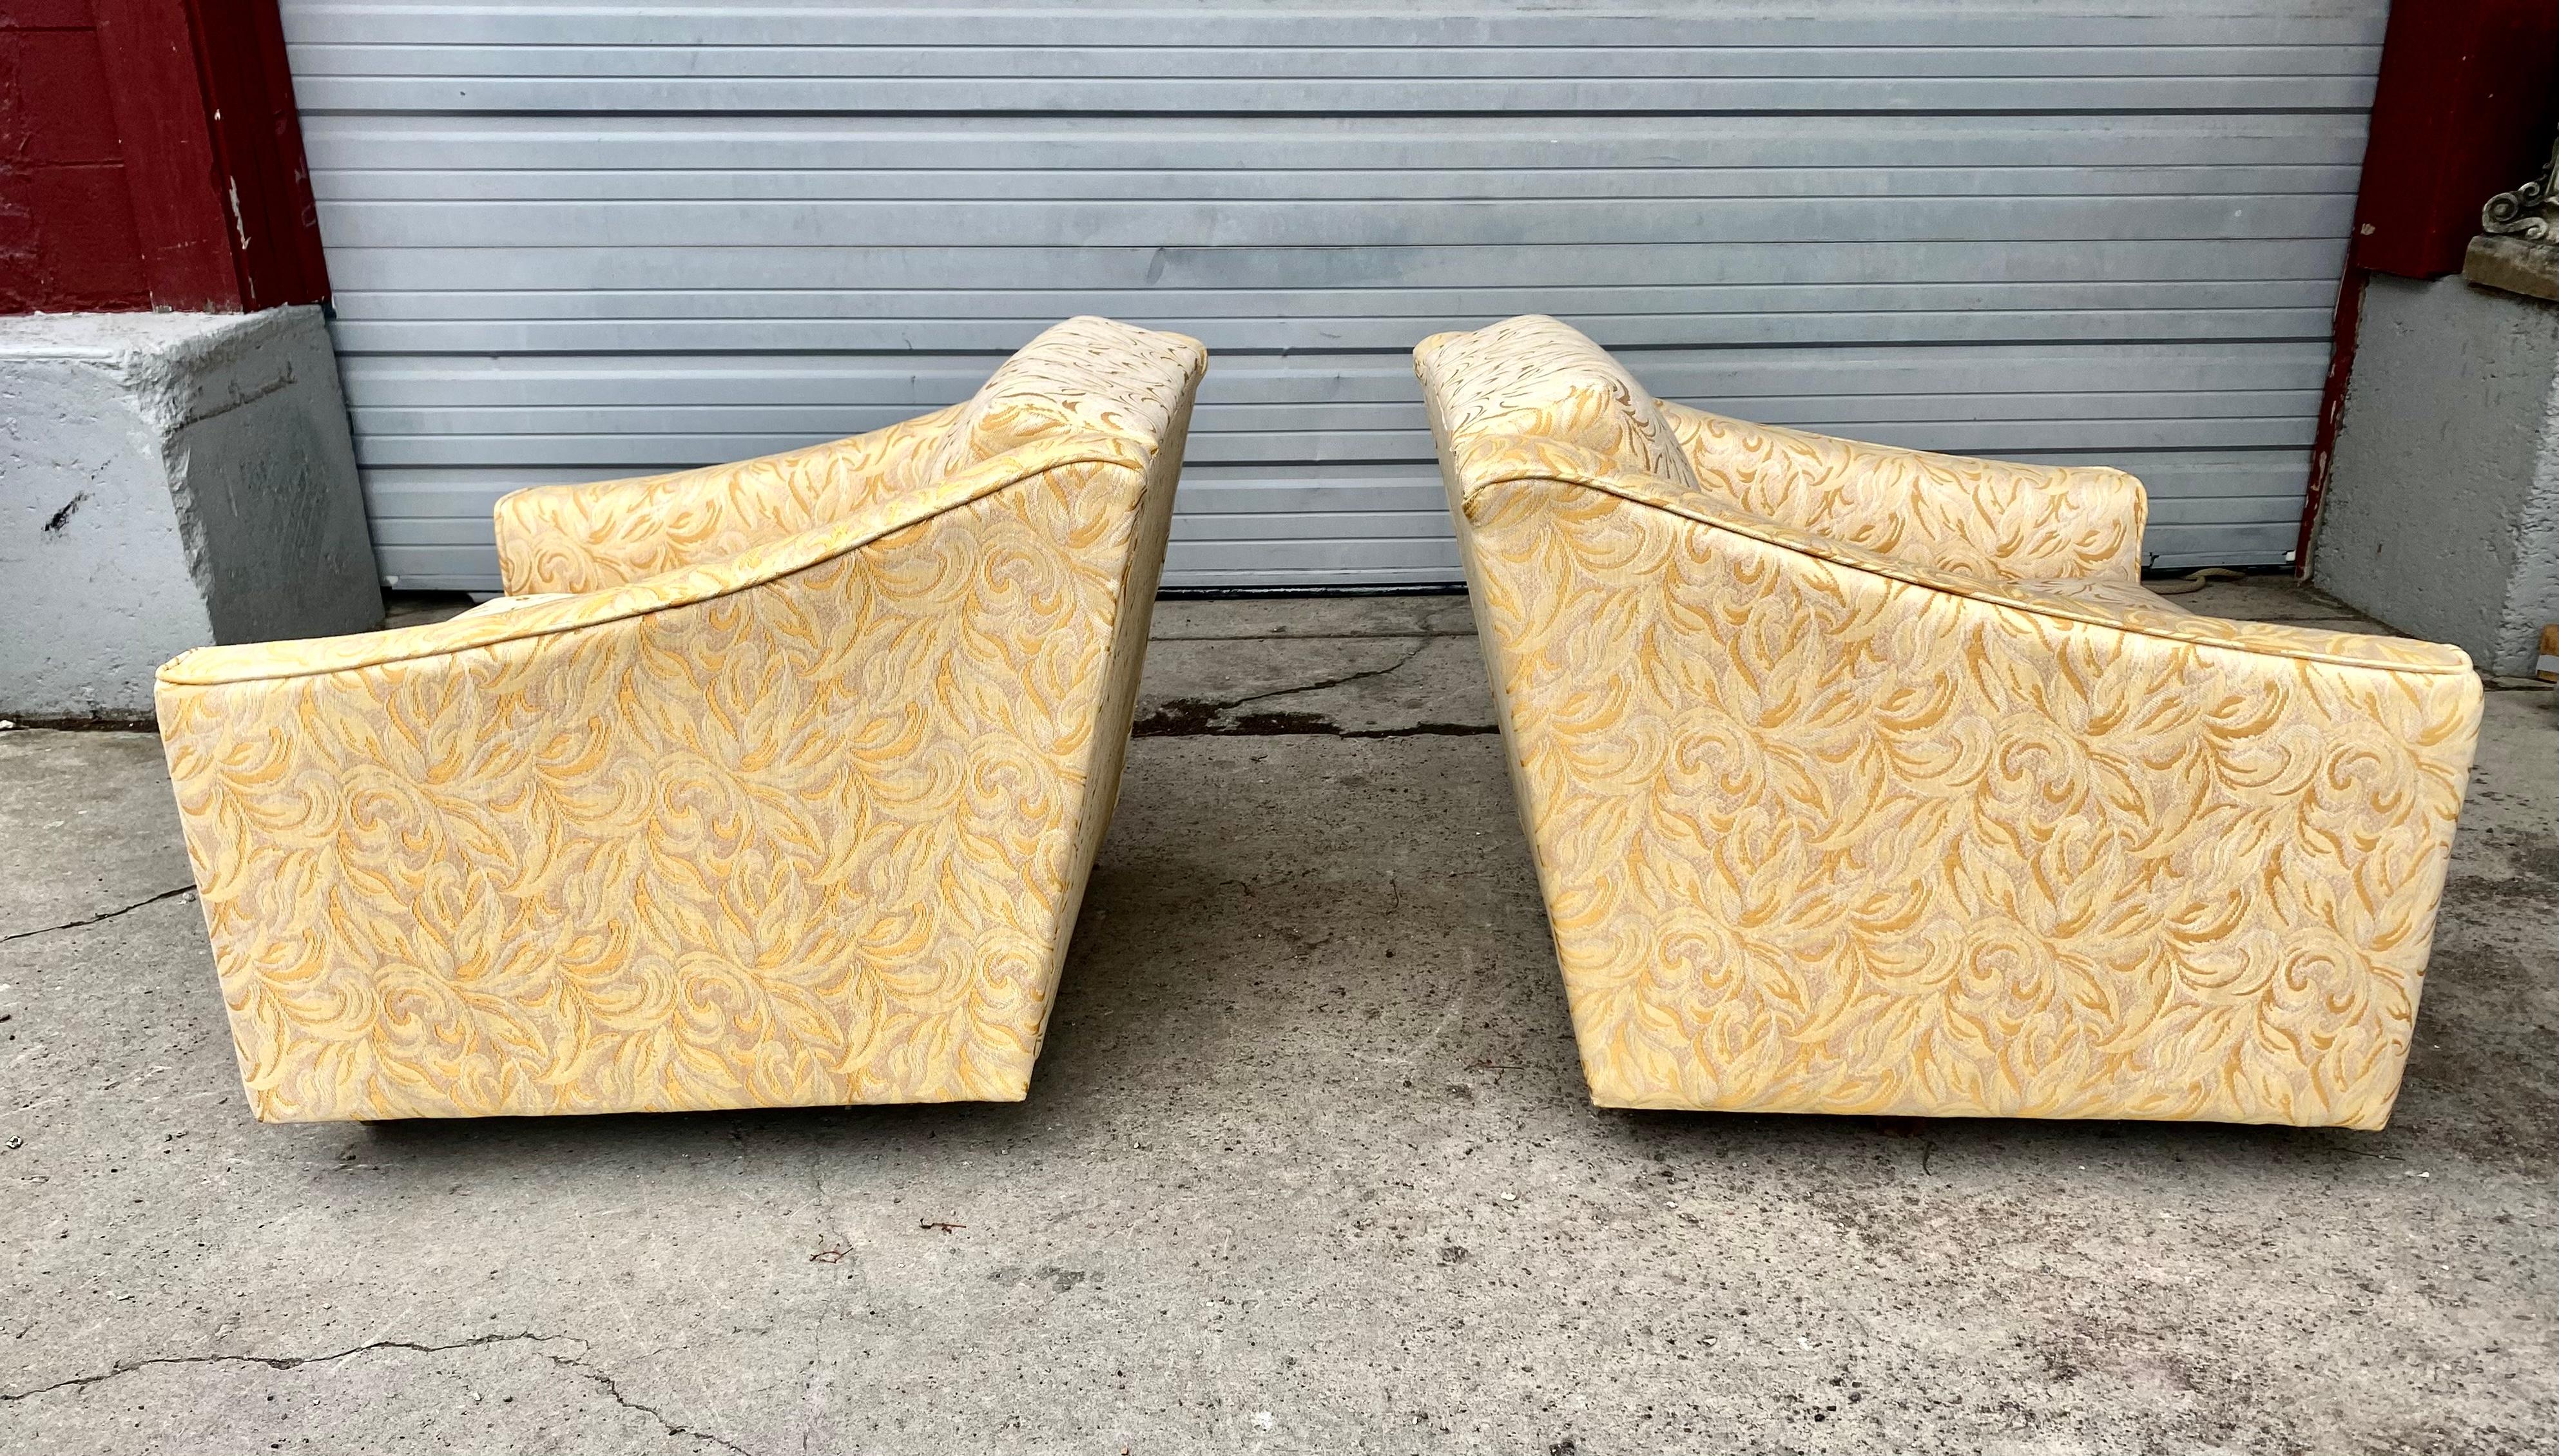 Matched pair stylized Mid-Century Modern lounge chairs by Koehler Chair 
 Co. Reminiscent of classic designs by Dunbar, Probber, etc.. Retains original fabric in amazing condition. appears they were never used. Extreamely comfortable. Beautiful